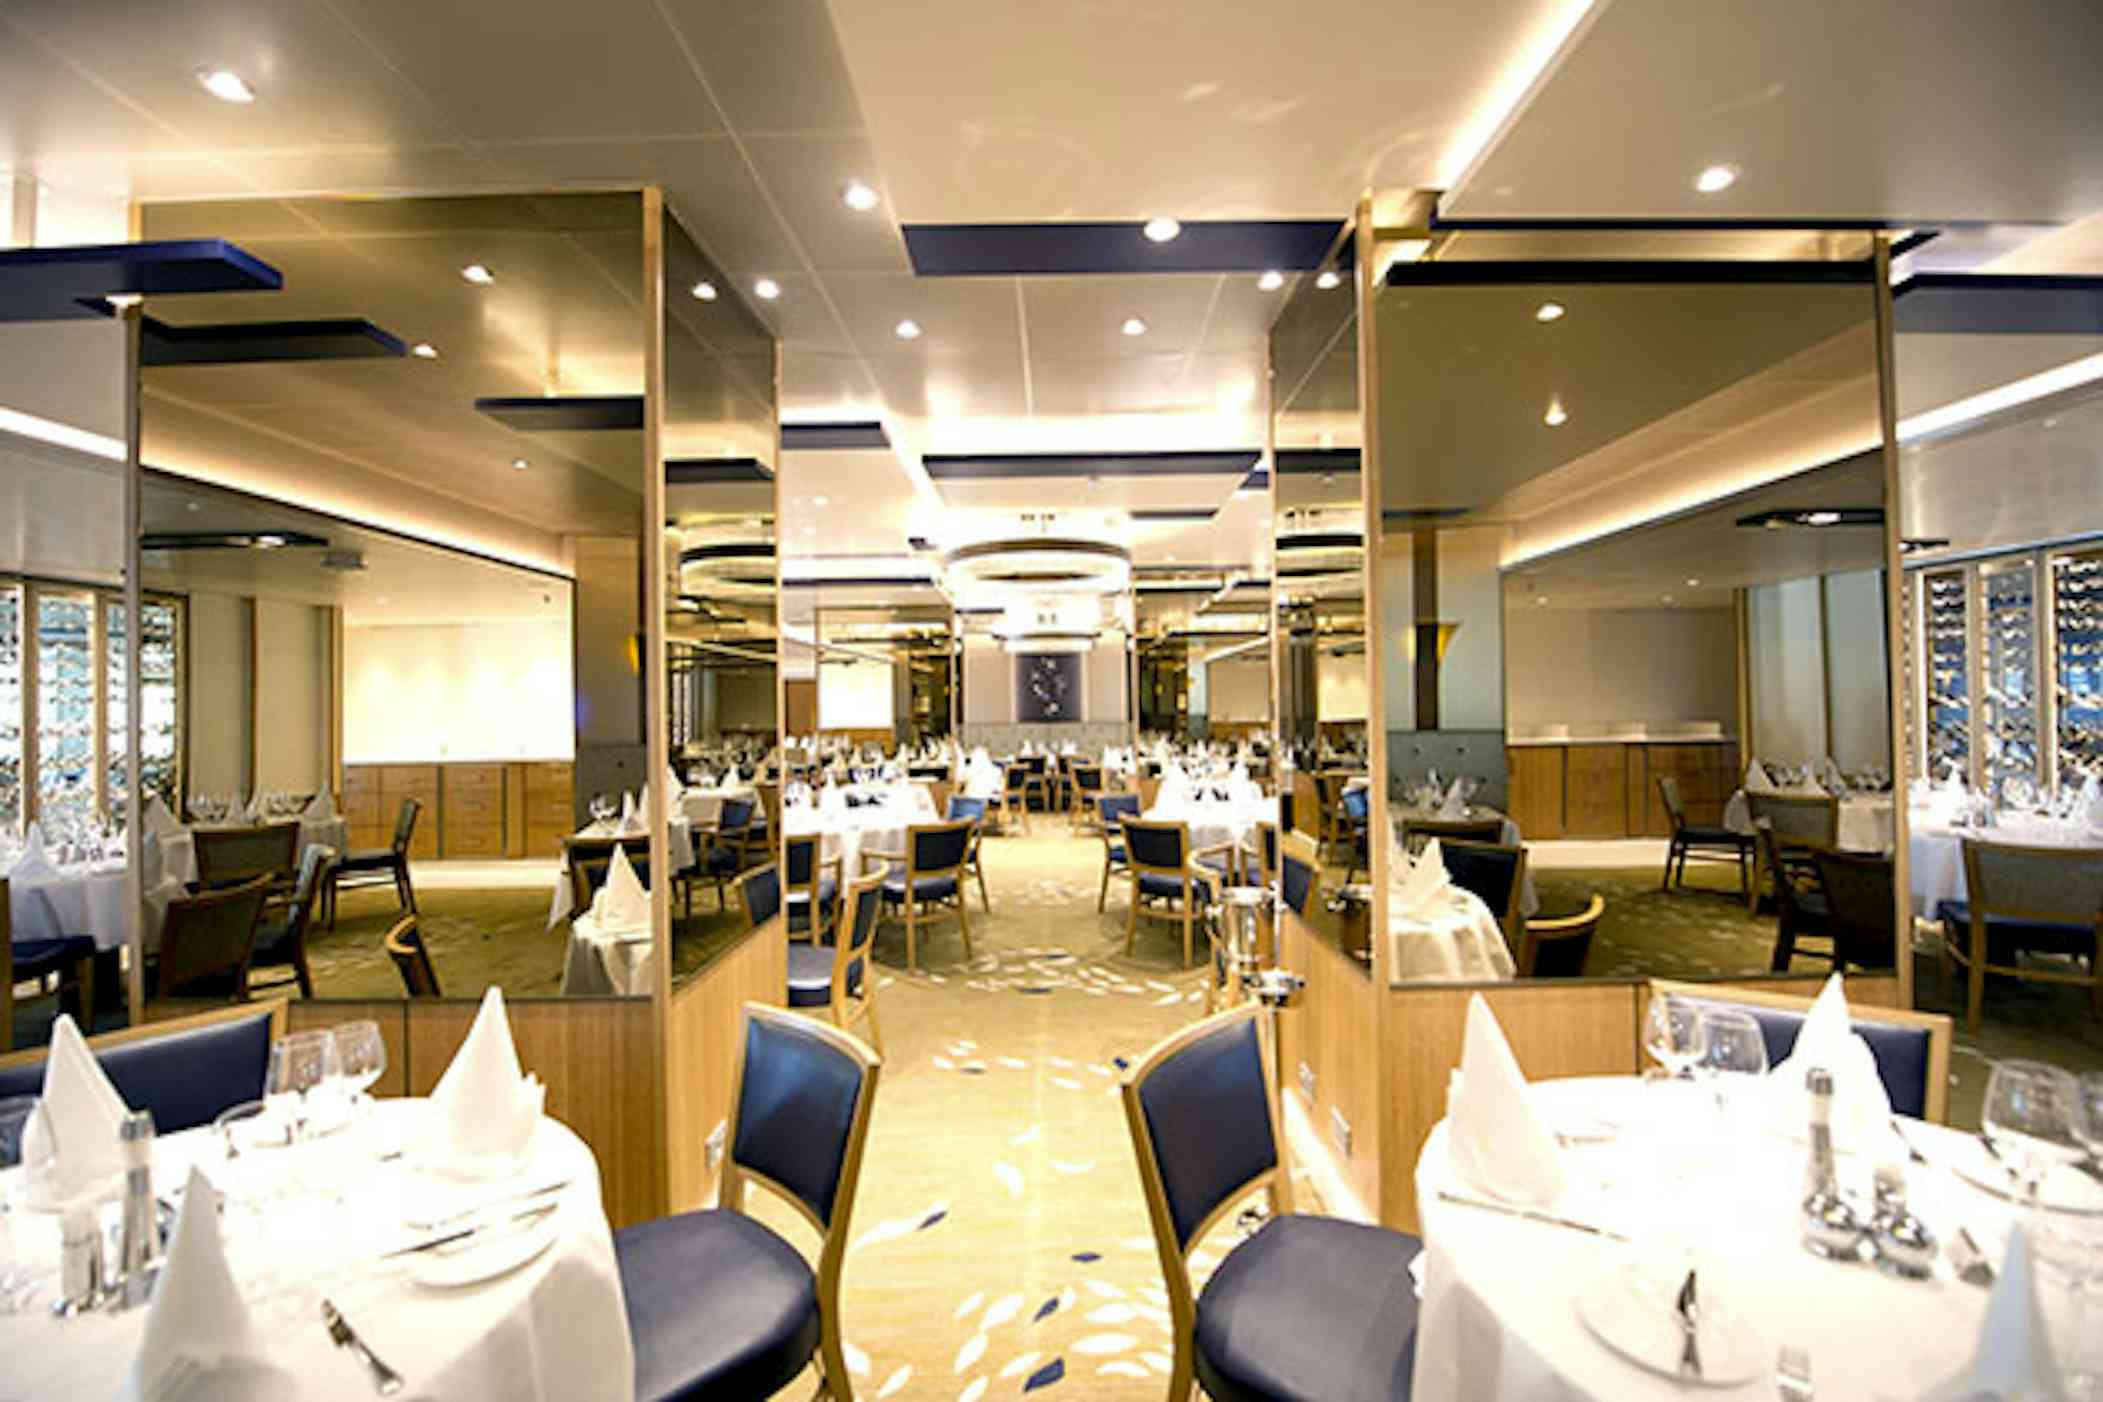 6 Best Cruise Ship Main Dining Rooms